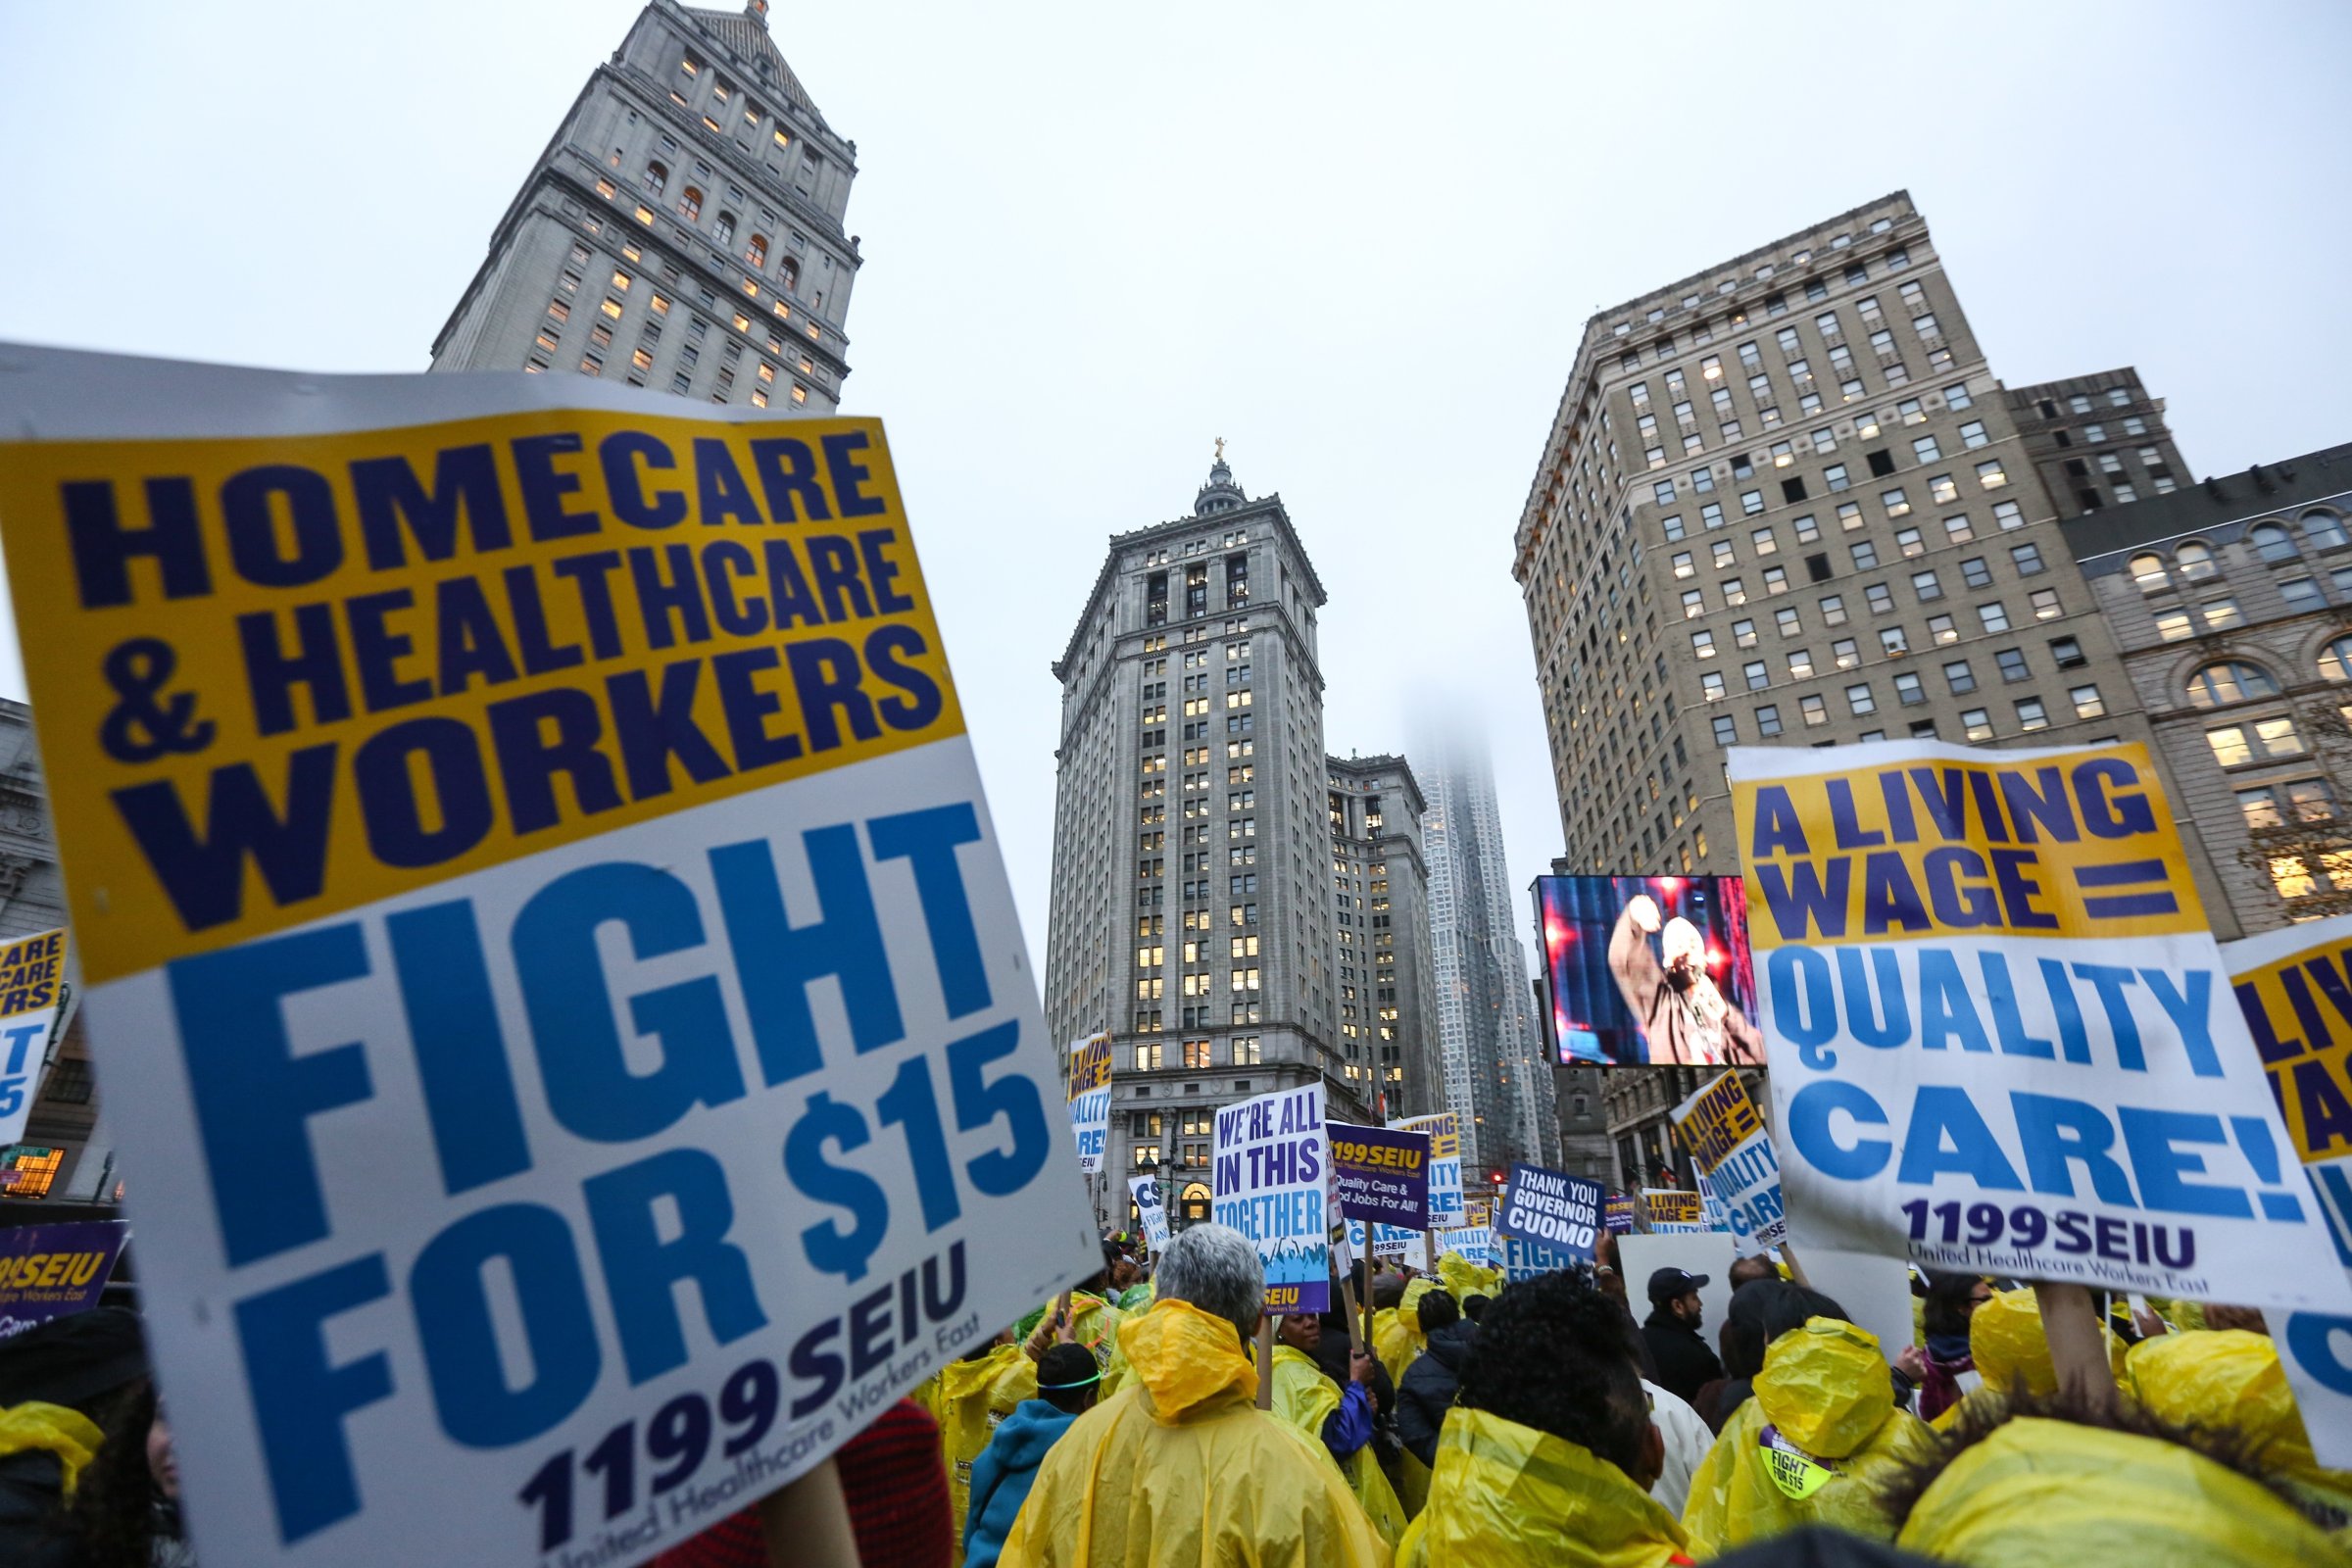 Rally for higher wages in New York